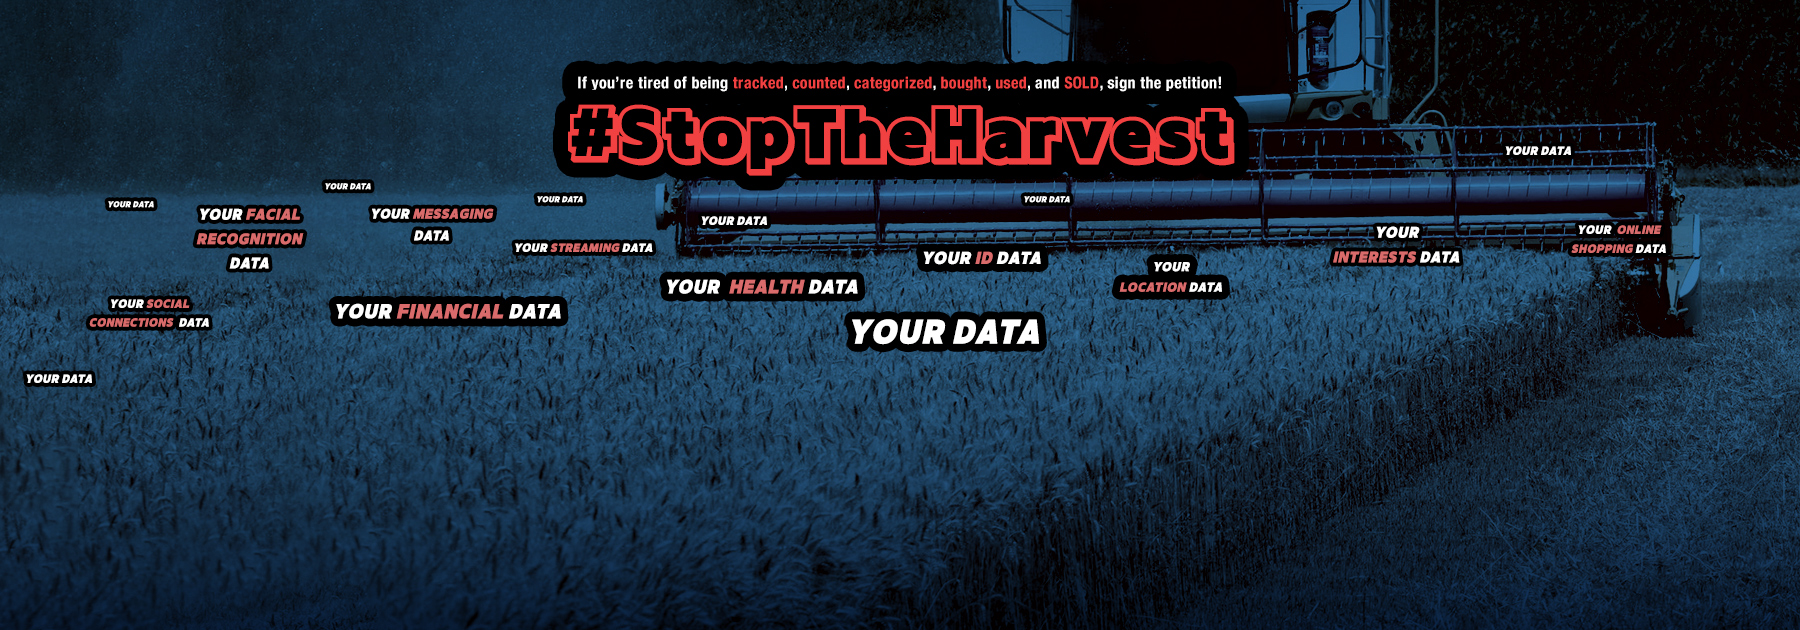 If you’re tired of being tracked, counted, categorized, bought, used, and SOLD, sign the petition! #StopTheHarvest